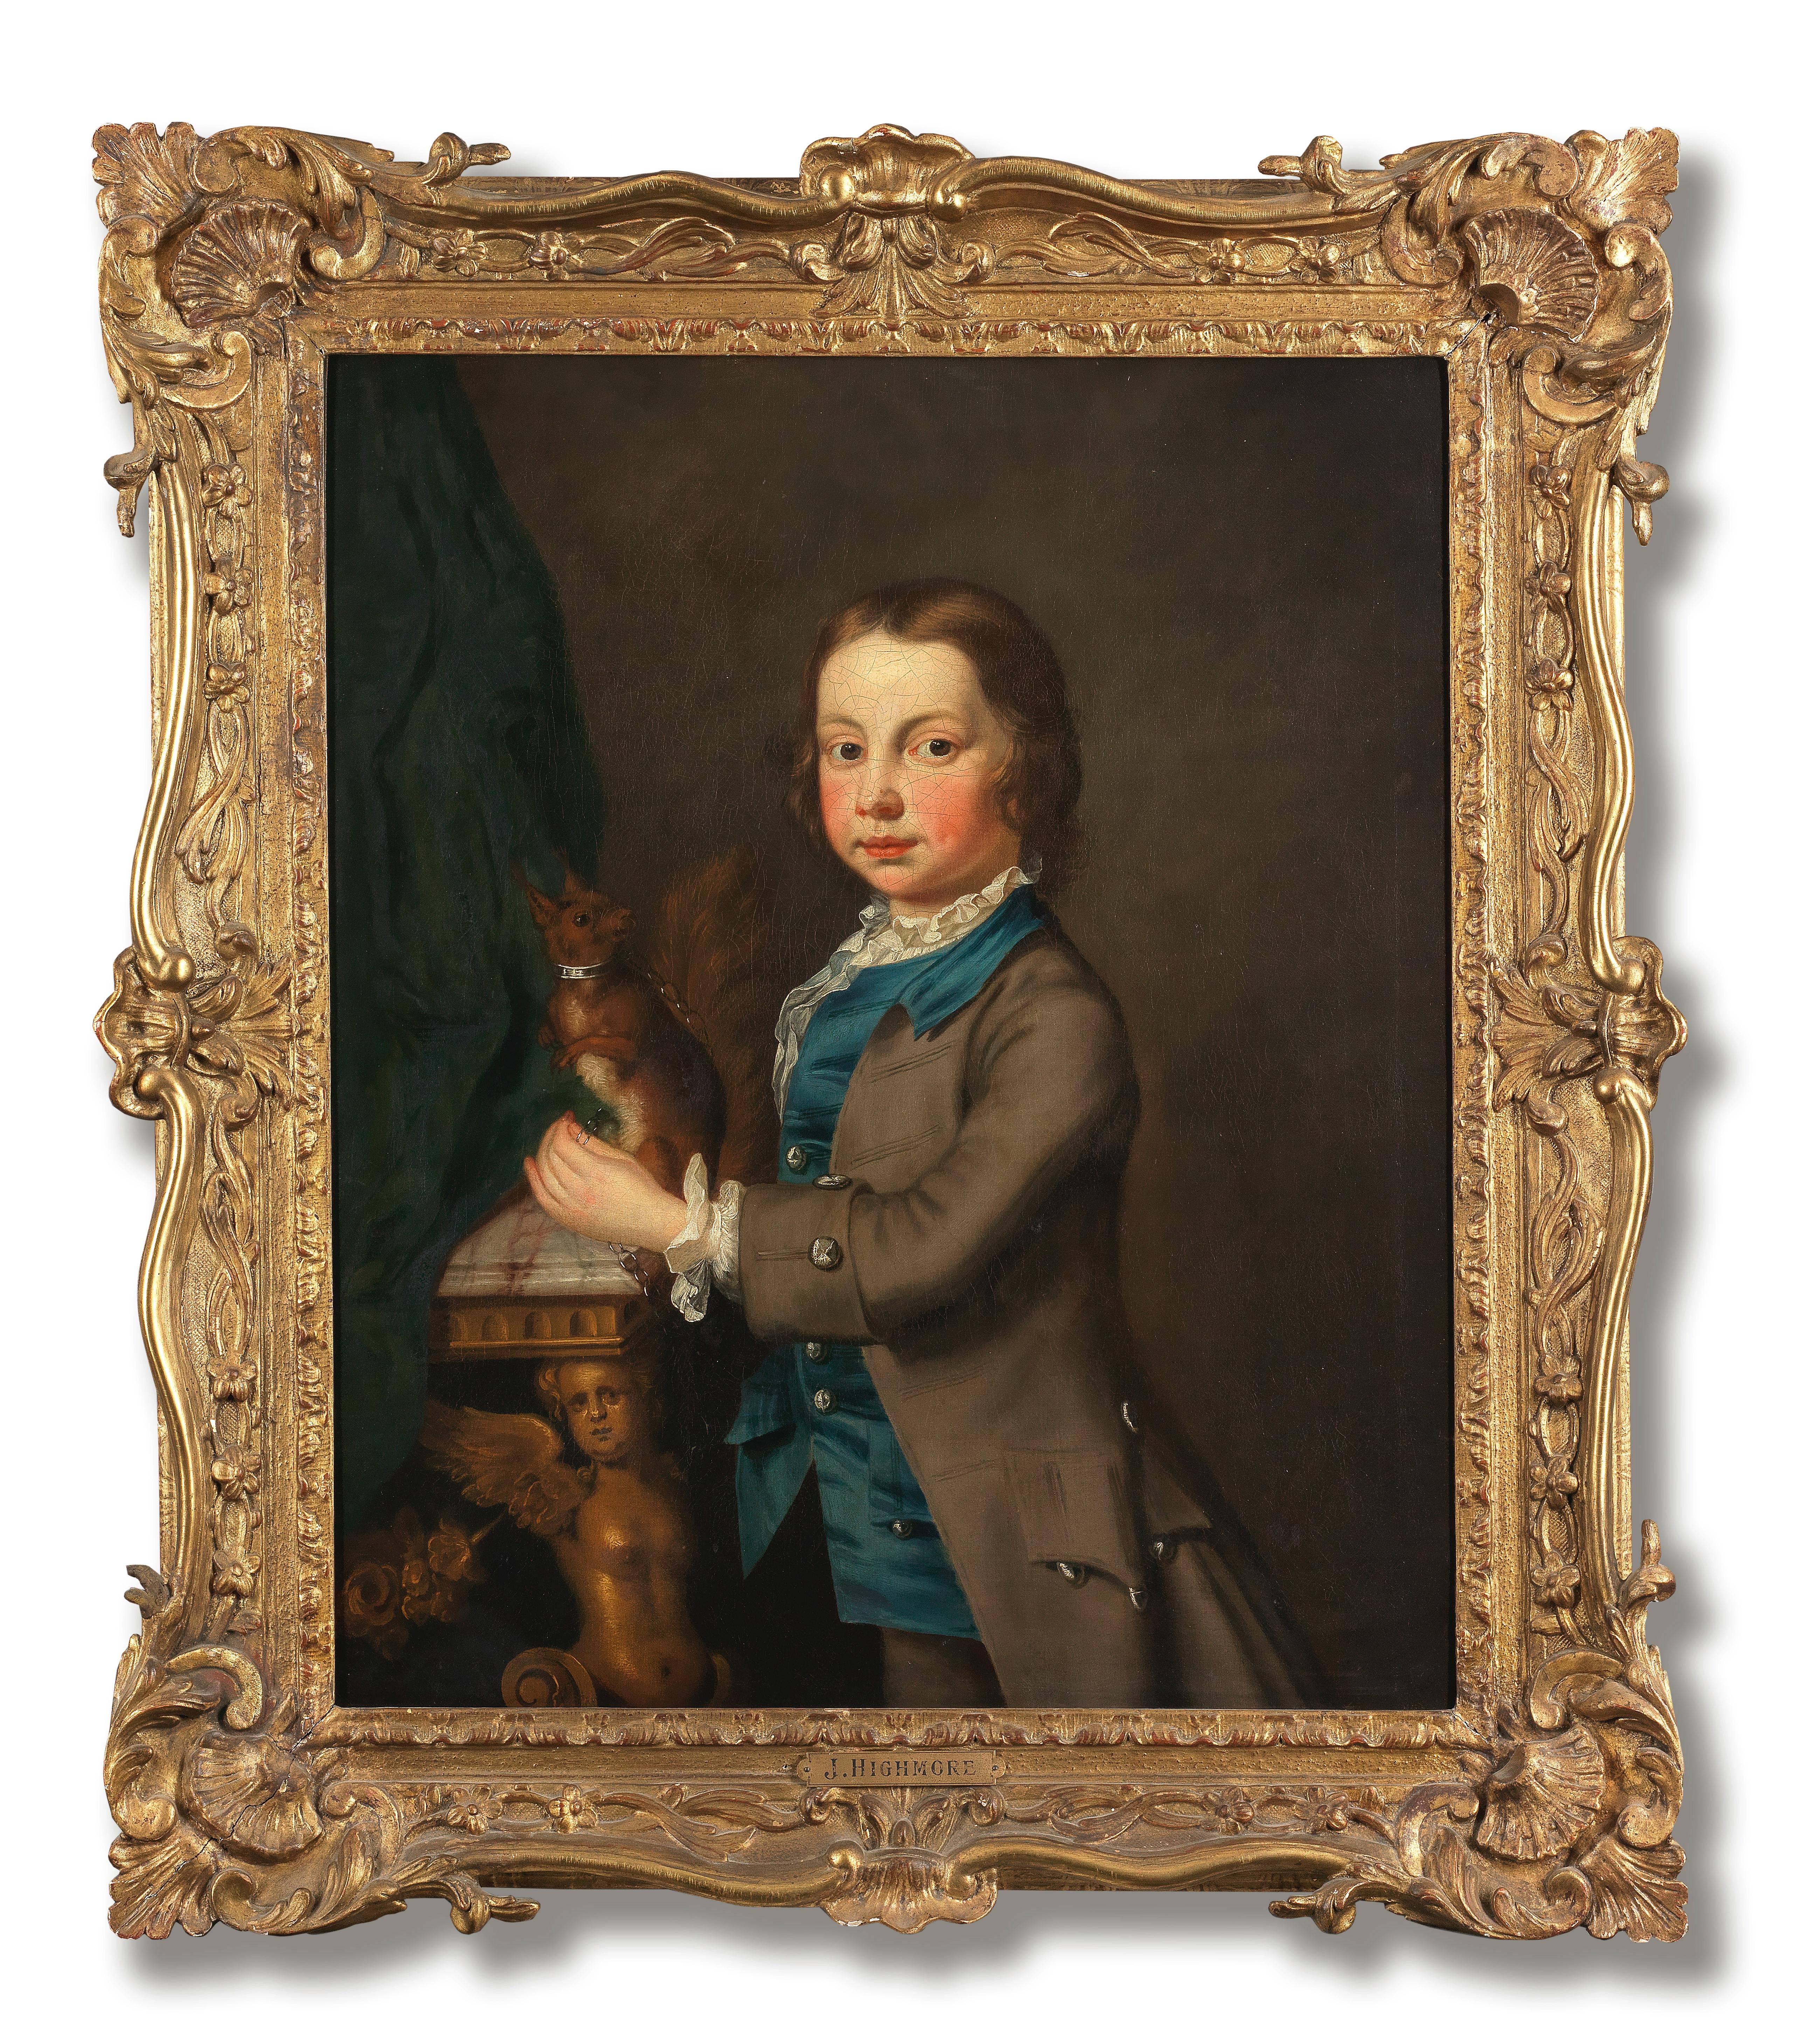 Portrait of a young boy holding his pet squirrel